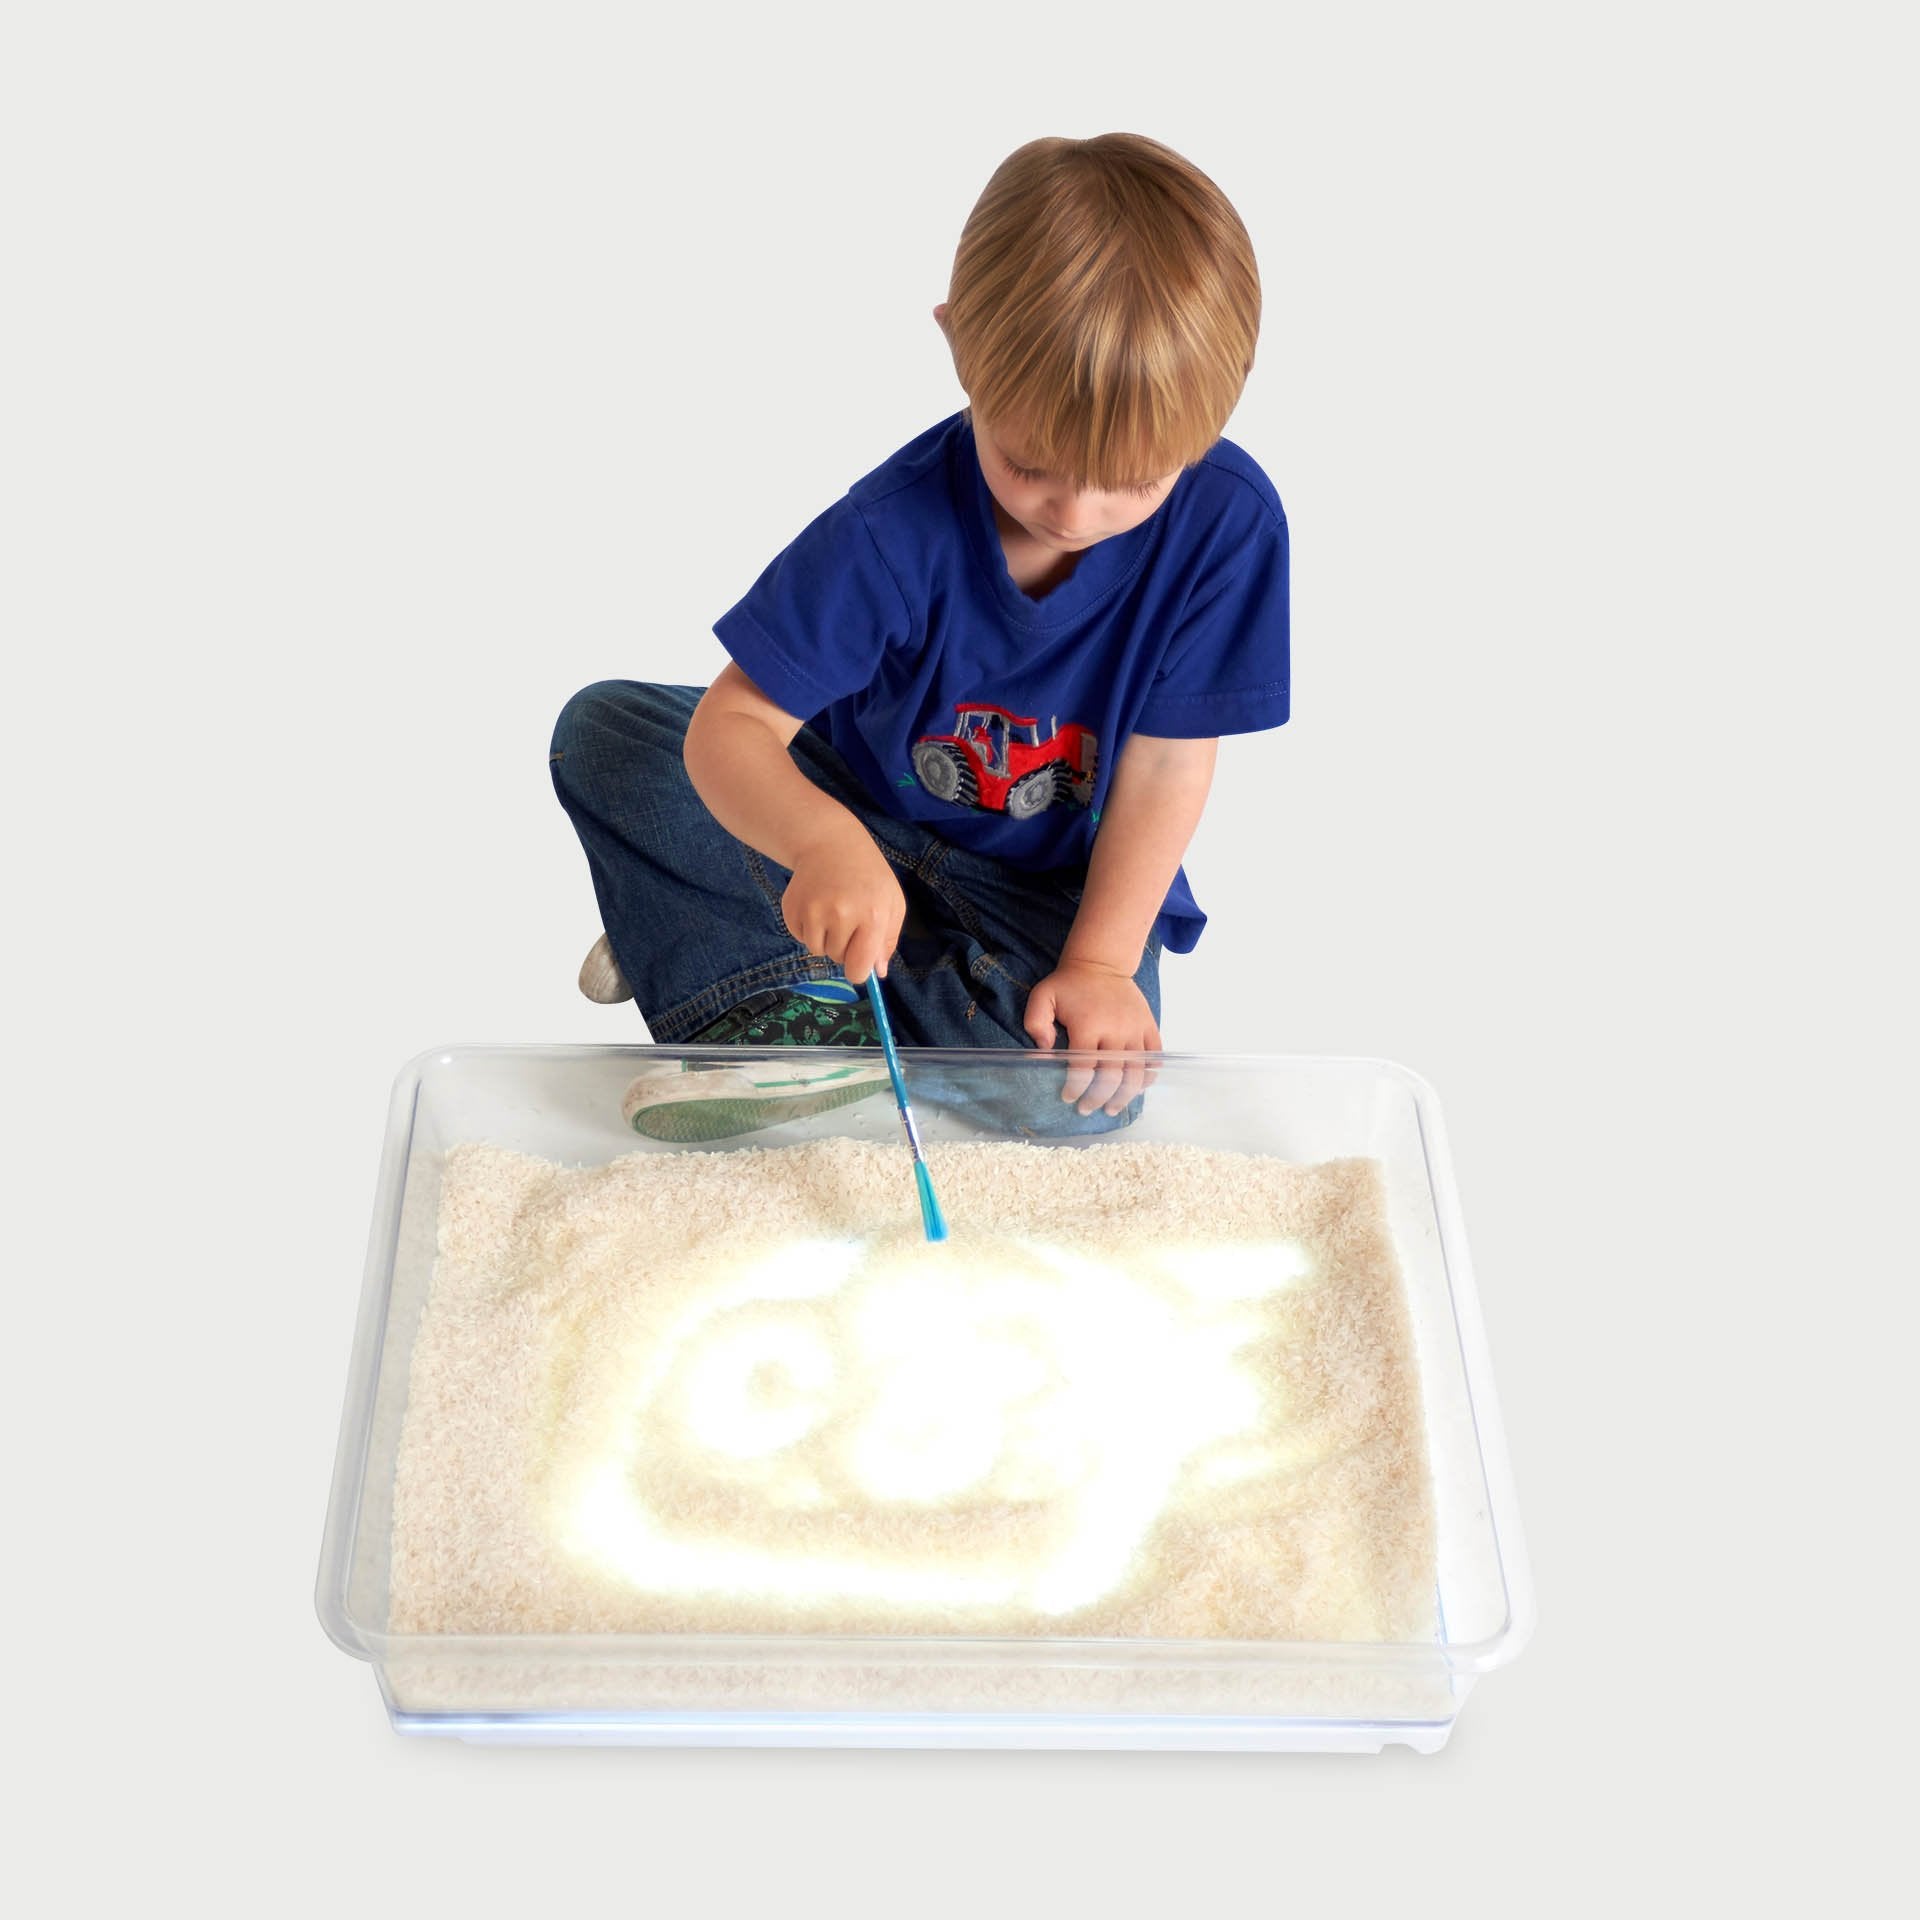 A3 Exploration Light Tray, This A3 Exploration Light Tray is for use on a desk, on the floor - inside or out . The A3 Exploration Light Tray is made from clear polycarbonate giving it incredible strength and longevity in the classroom where its rigidity means that even when filled with water it can be lifted and moved around without it flexing. In addition to its everyday uses with a variety of liquids and textures for general artwork the A3 Exploration Light Tray has been cleverly designed to fit over our 